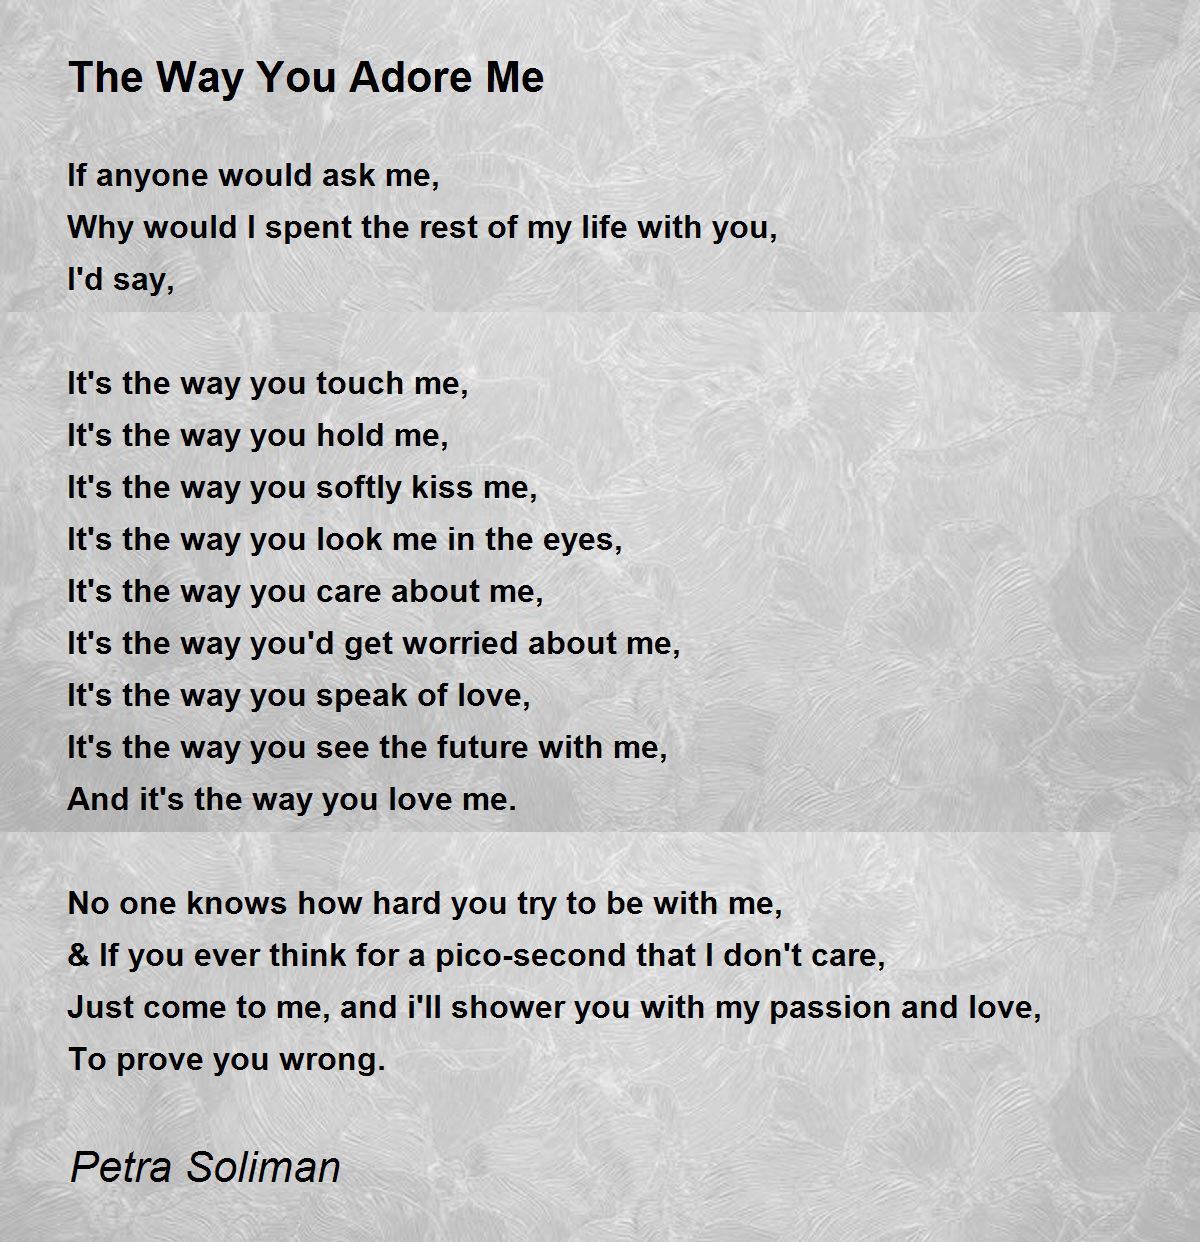 https://img.poemhunter.com/i/poem_images/644/the-way-you-adore-me.jpg